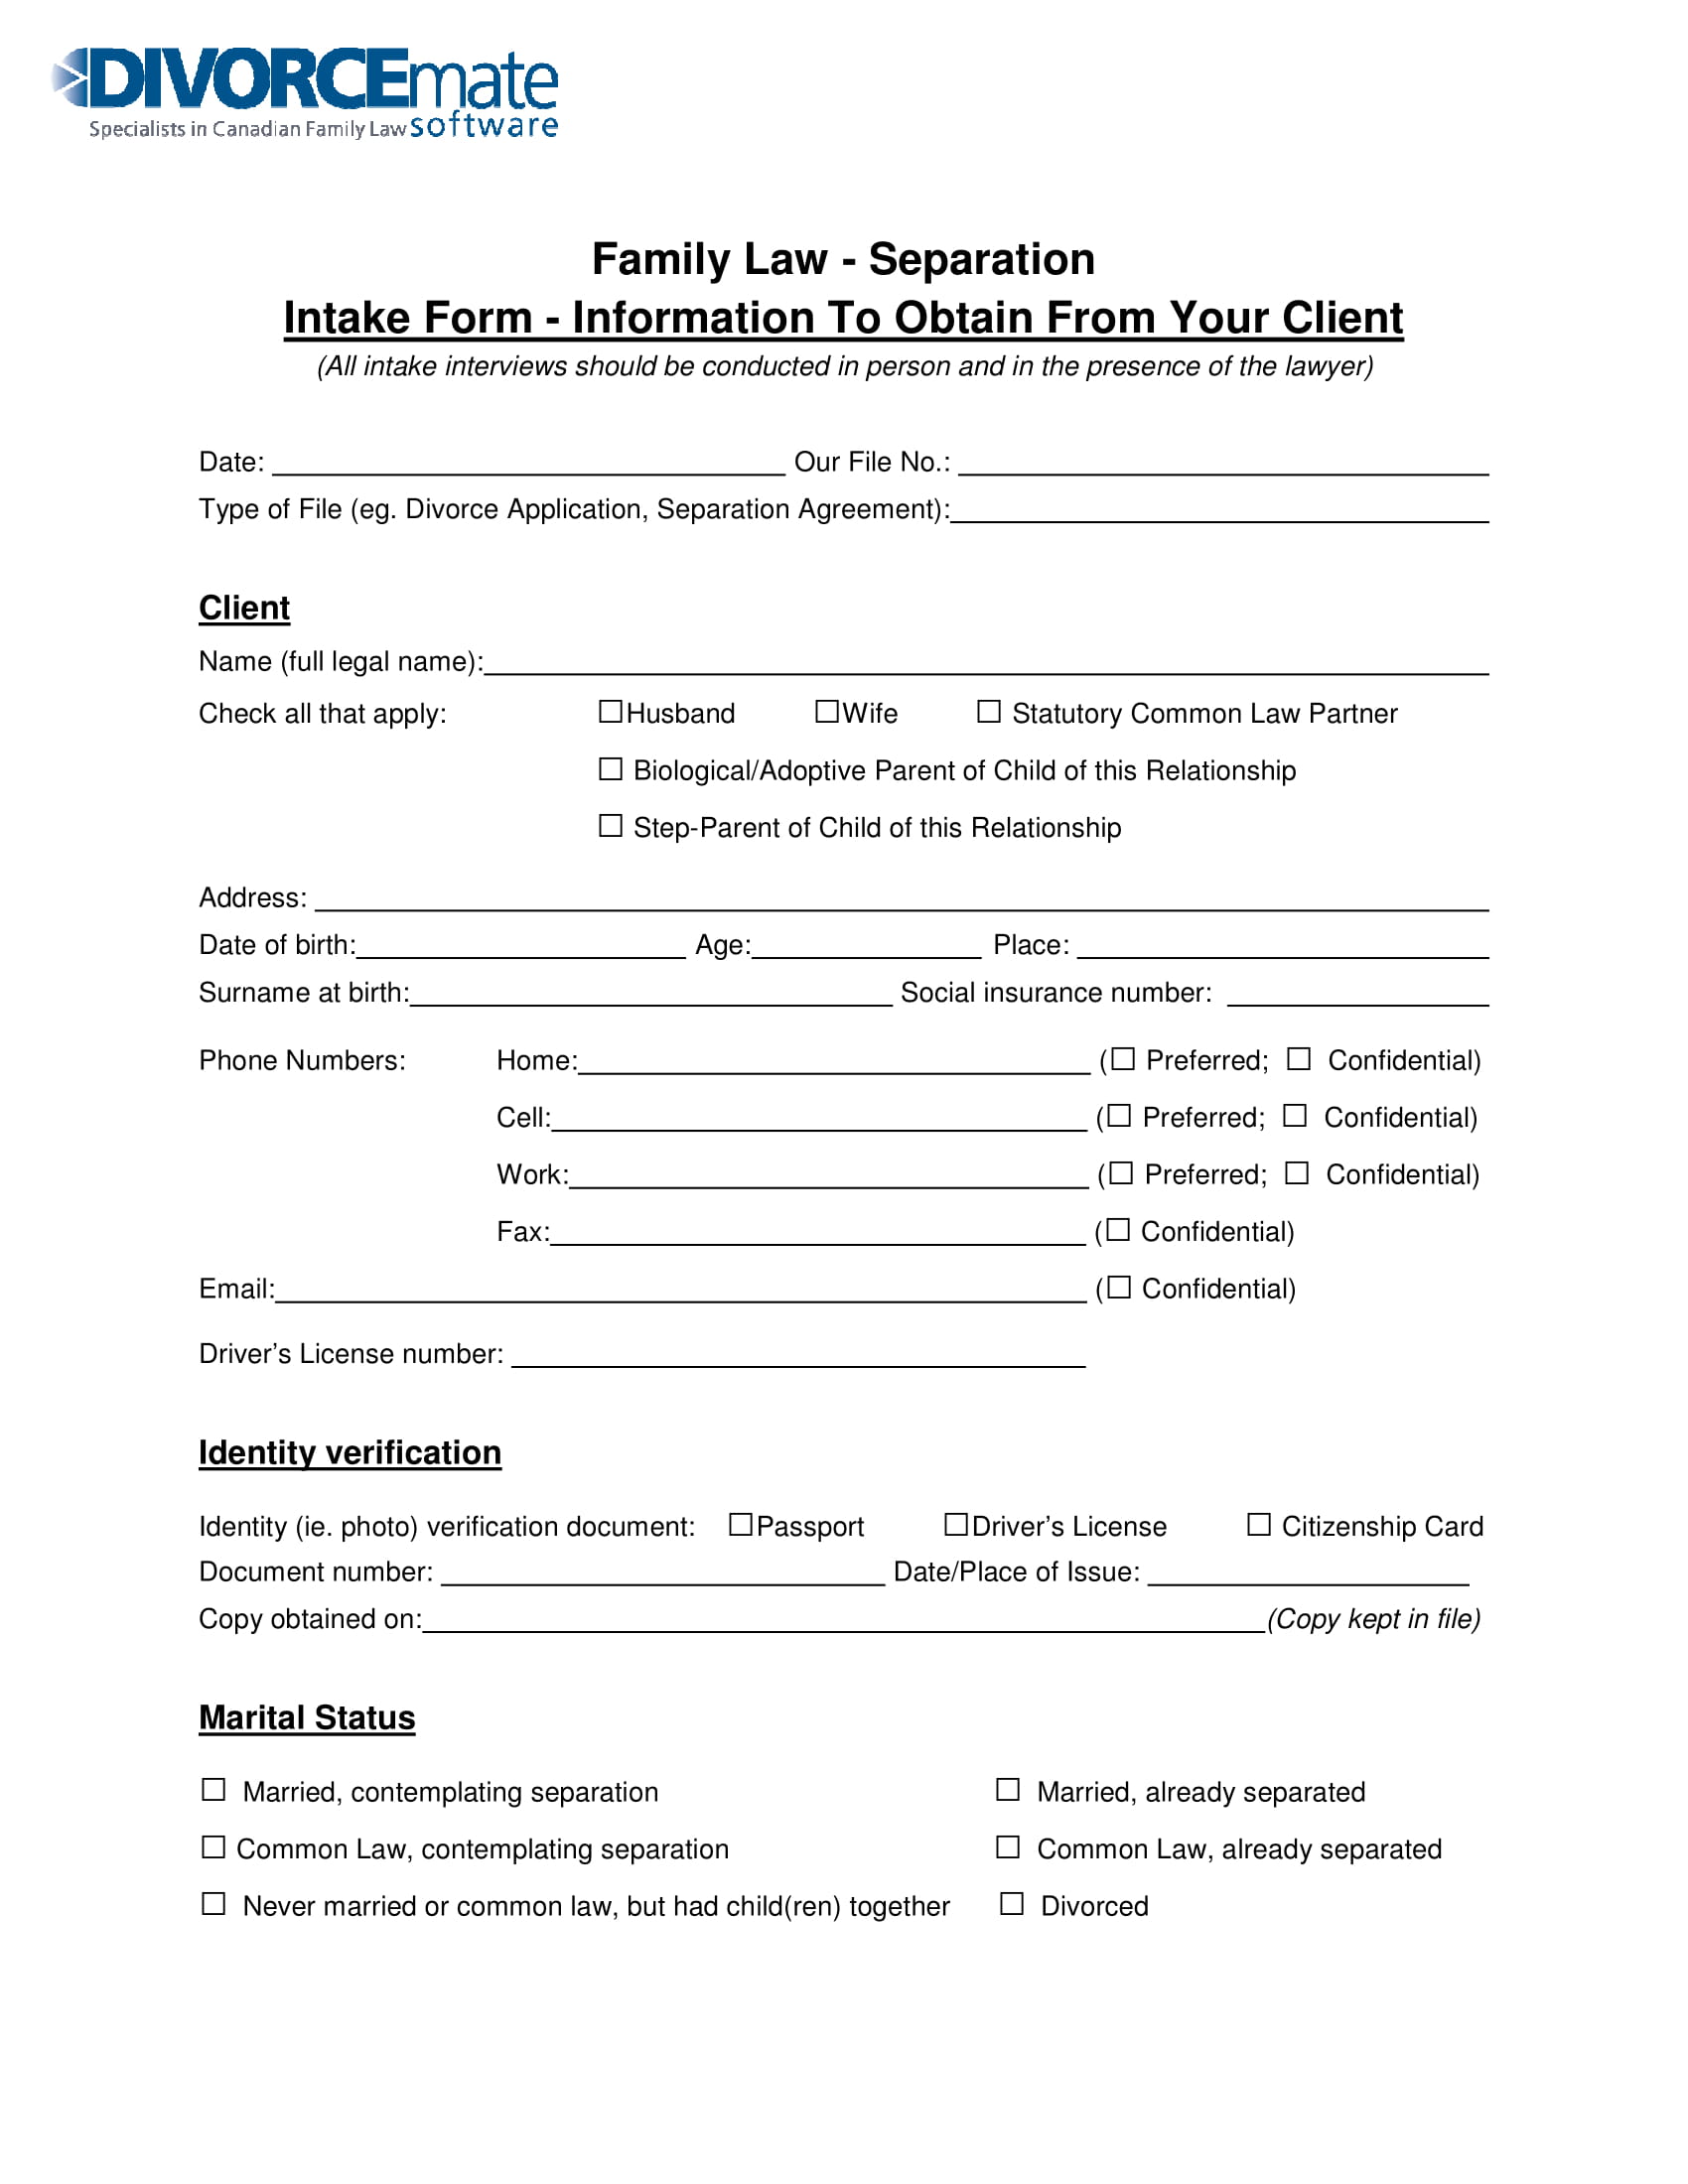 family law separation intake form 01